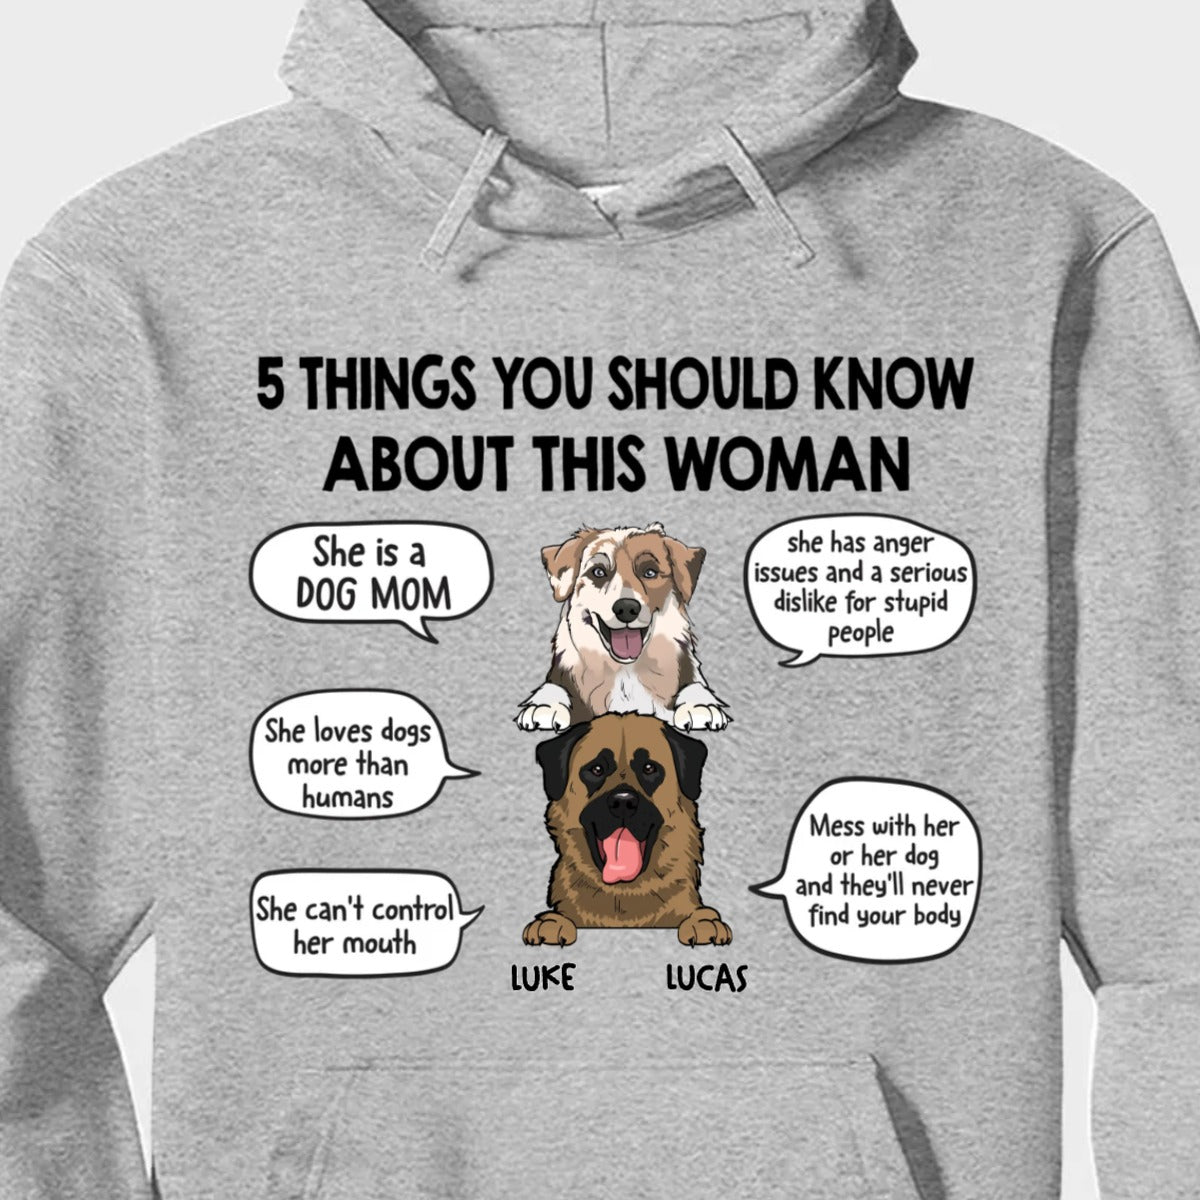 Dog Lovers - Five Things About This Dog Mom - Personalized Unisex T - shirt, Hoodie - The Next Custom Gift